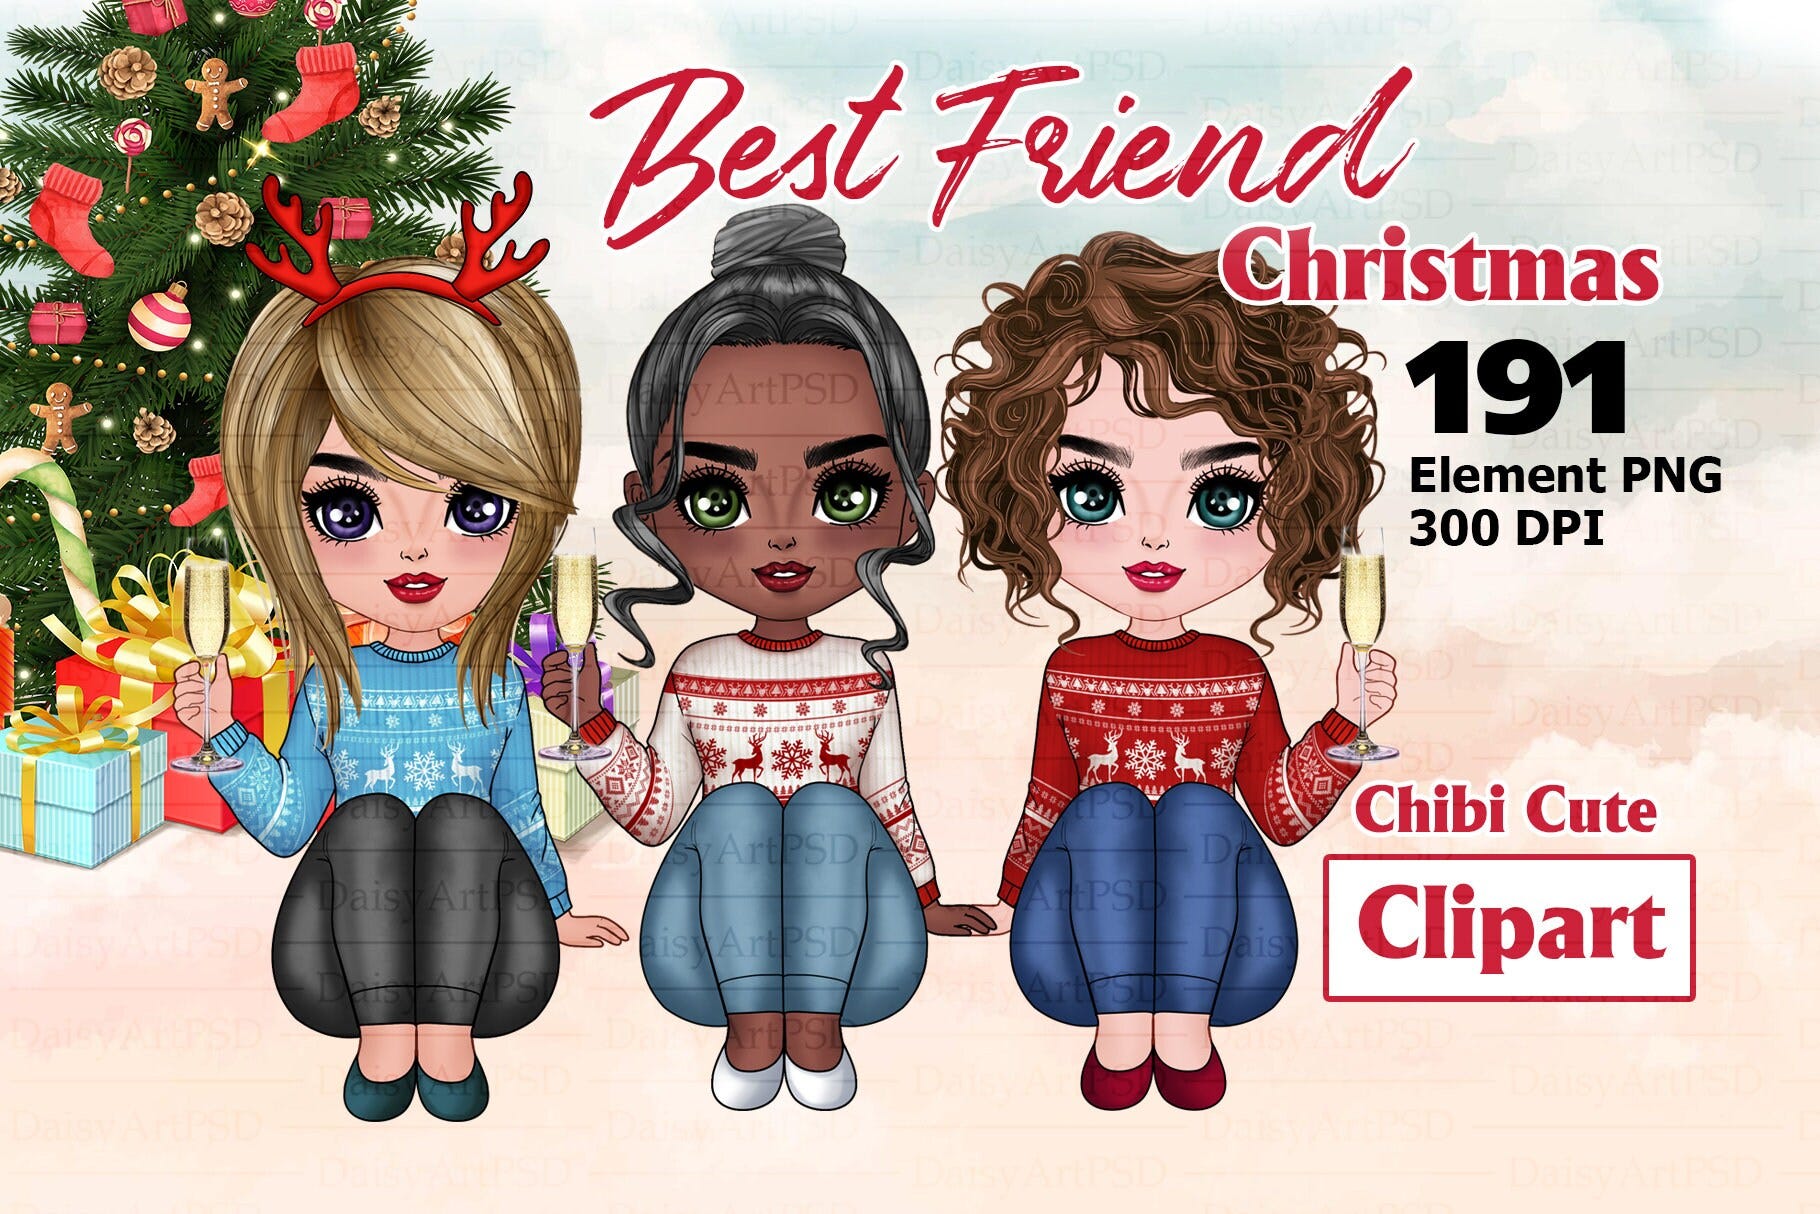 Christmas Best Friends Sitting Chibi Cute Clipart 02, Besties clipart, Xmas Girl, Soul Sisters Clipart, Customizable PNG.